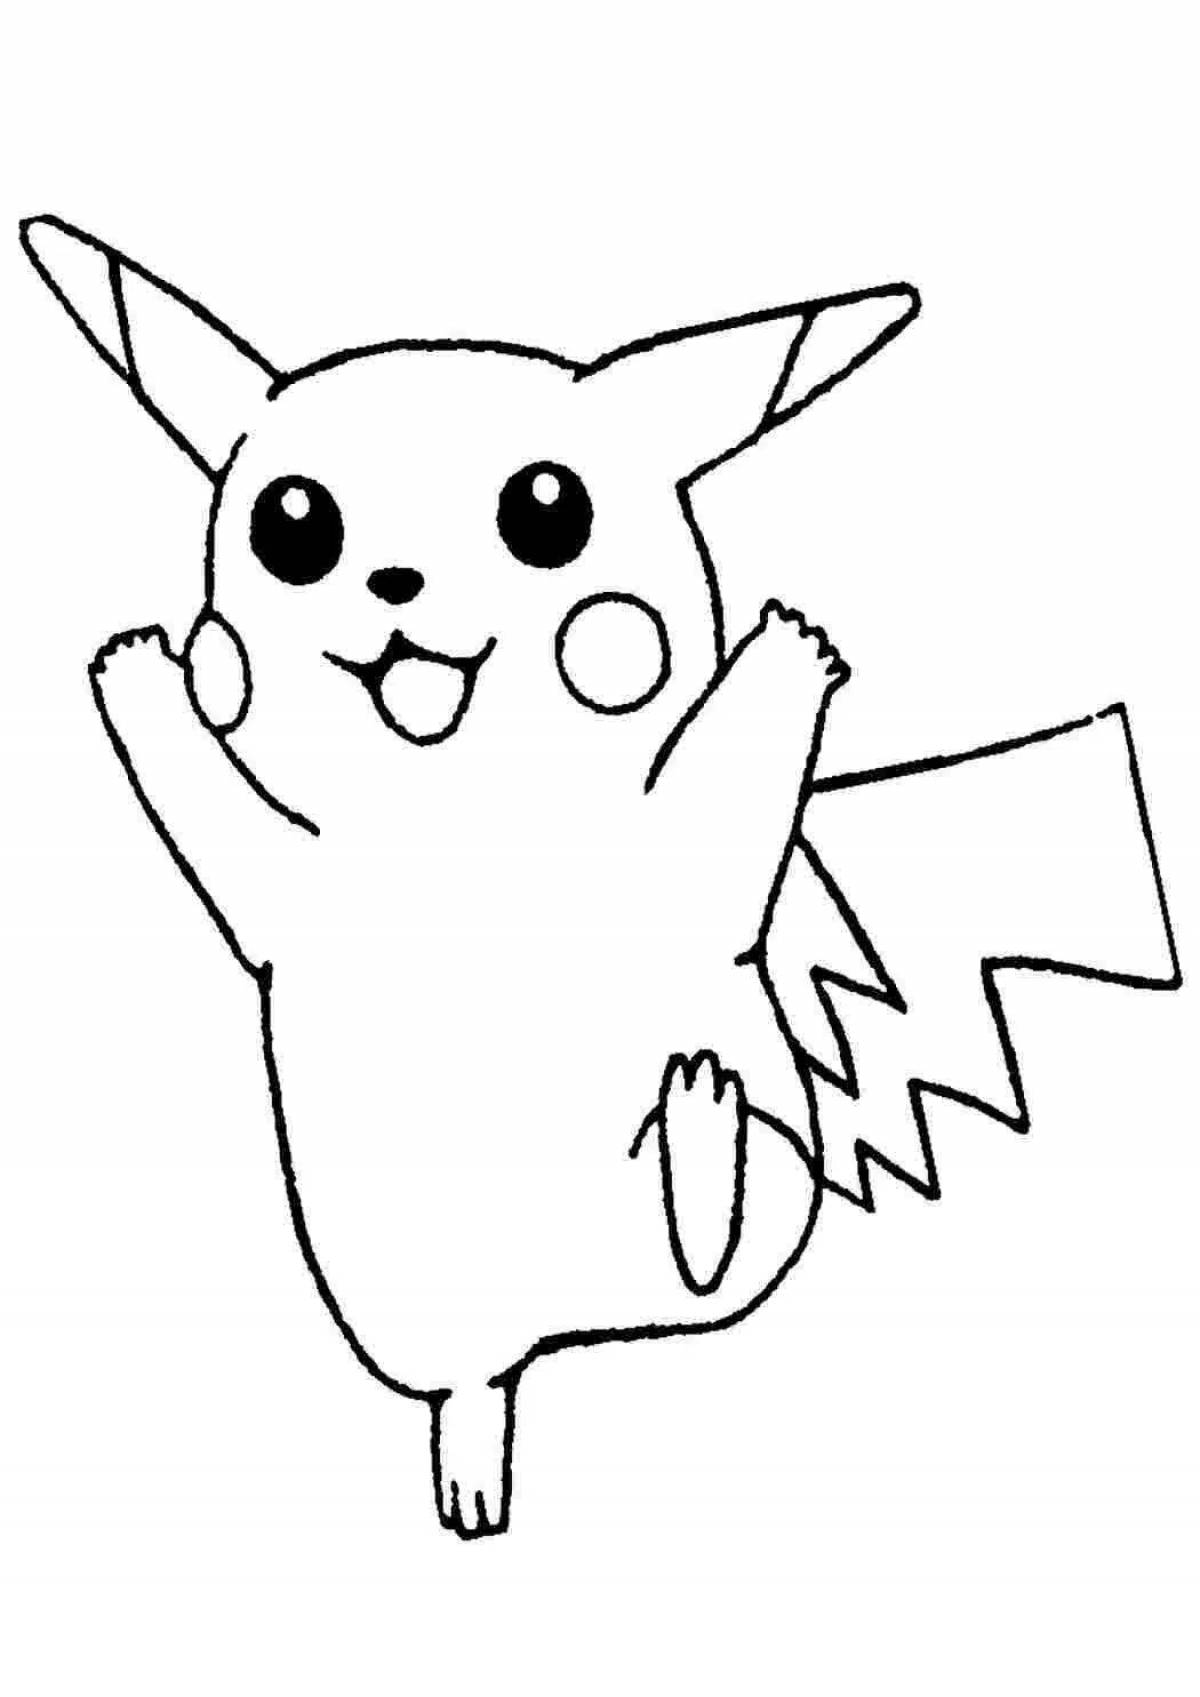 Awesome pokemon coloring pages for kids